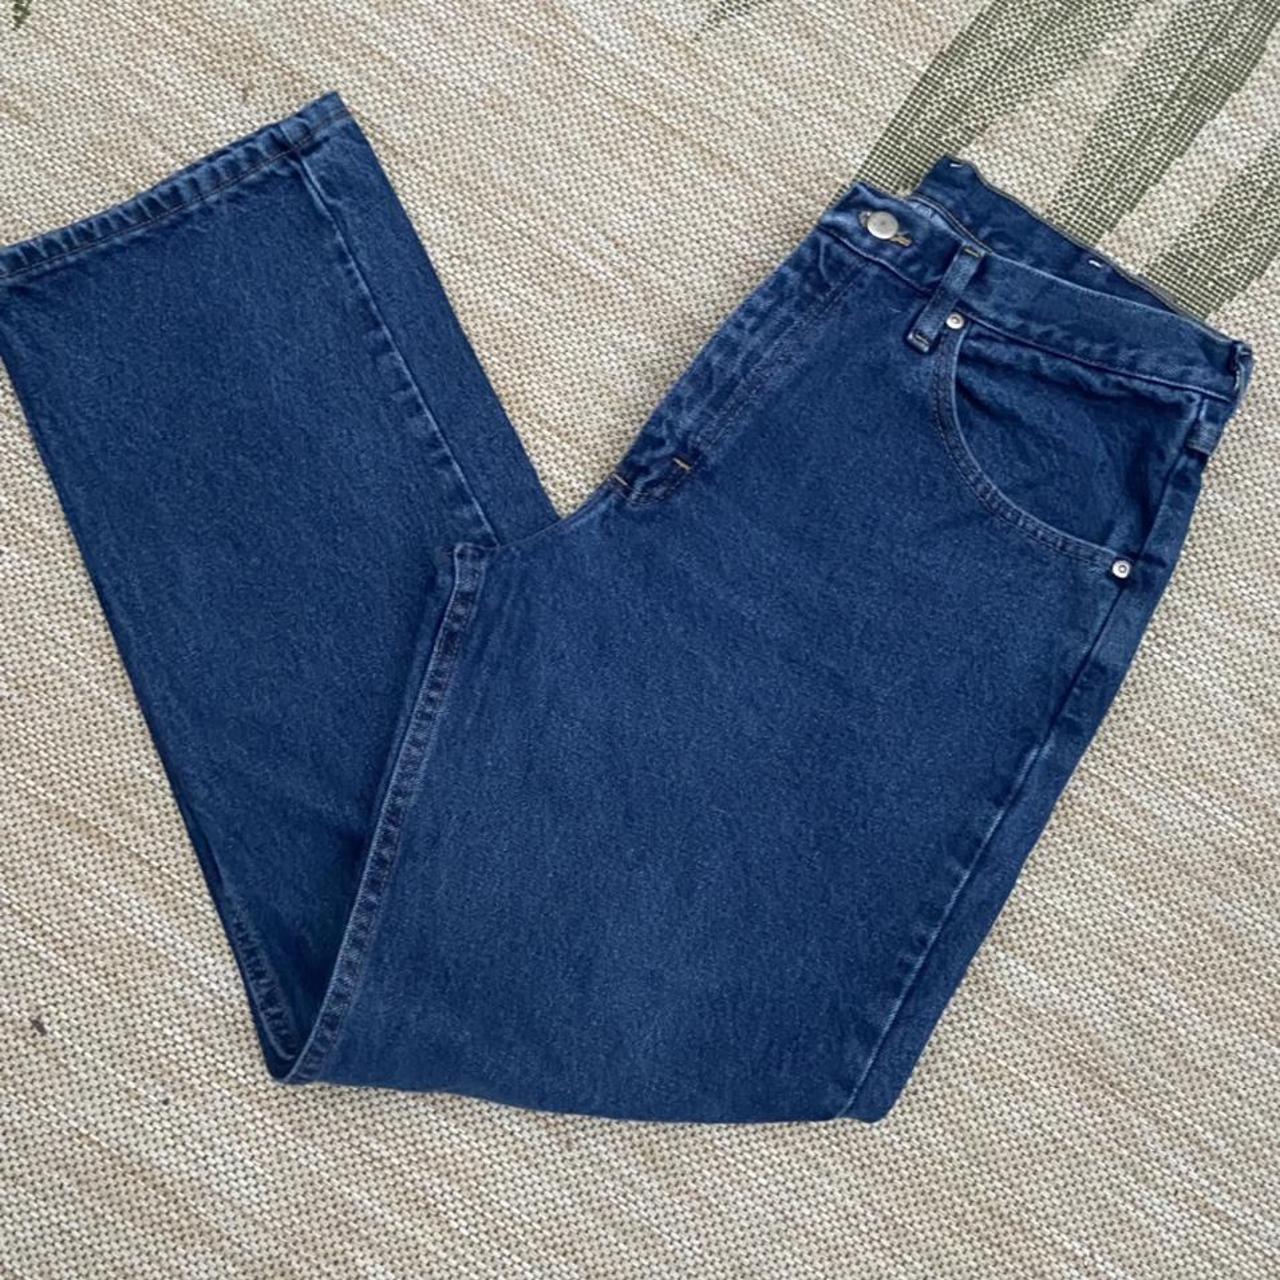 Product Image 1 - Wrangler relaxed fit Jeans. 34/32